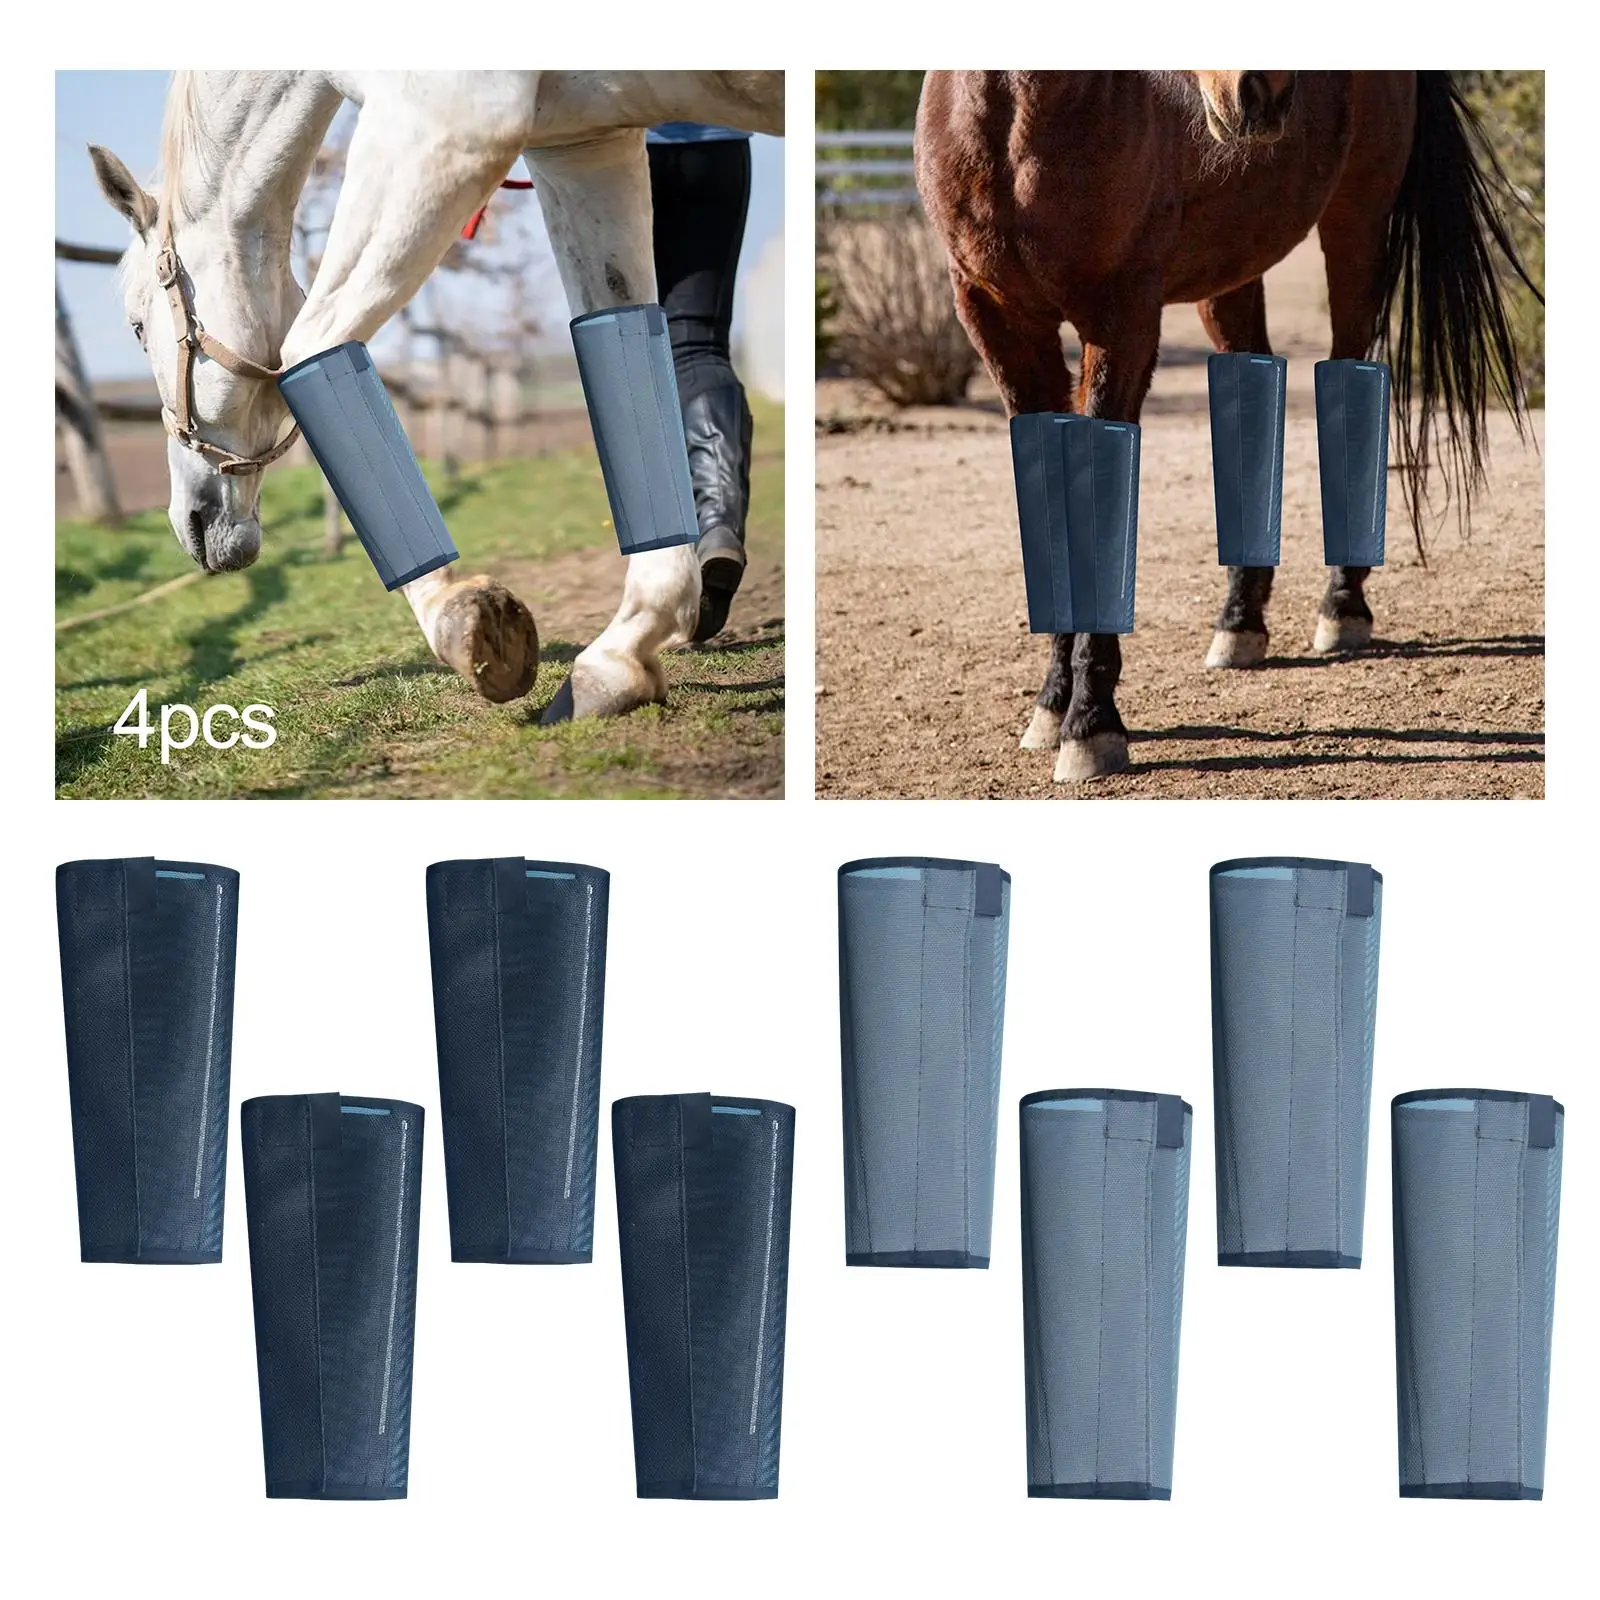 4Pcs Horse Boots Mesh Breathable Outdoor Protector Training Riding Jumping Running Leg Gear Leg Wraps Equestrian Accessories